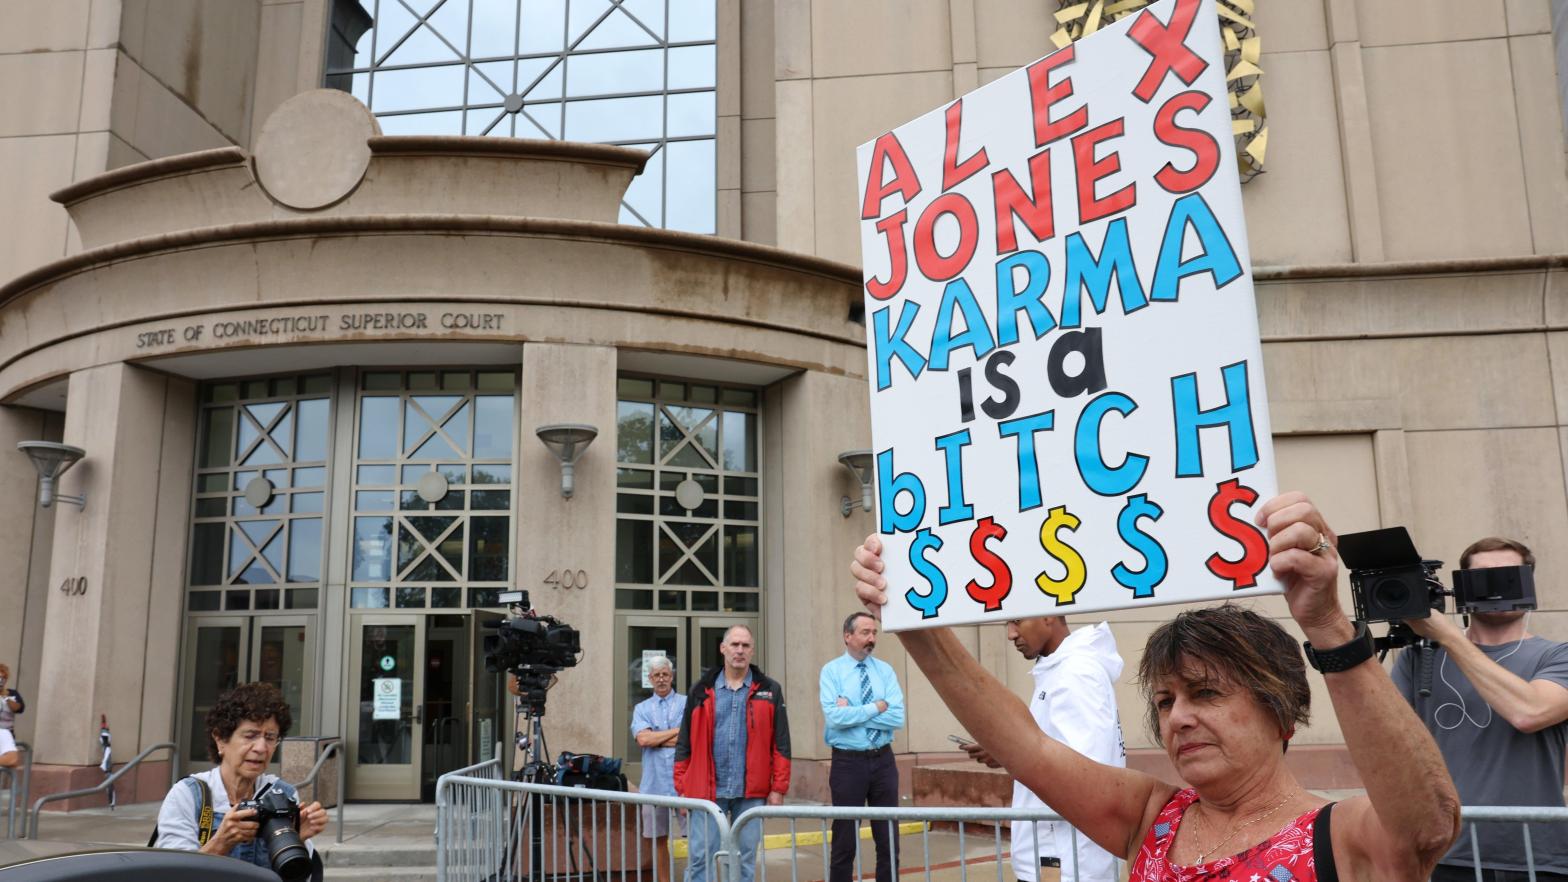 A woman holds a protest sign outside of the Waterbury Superior Court today. Alex Jones was not in attendance. (Image: Spencer Platt, Getty Images)